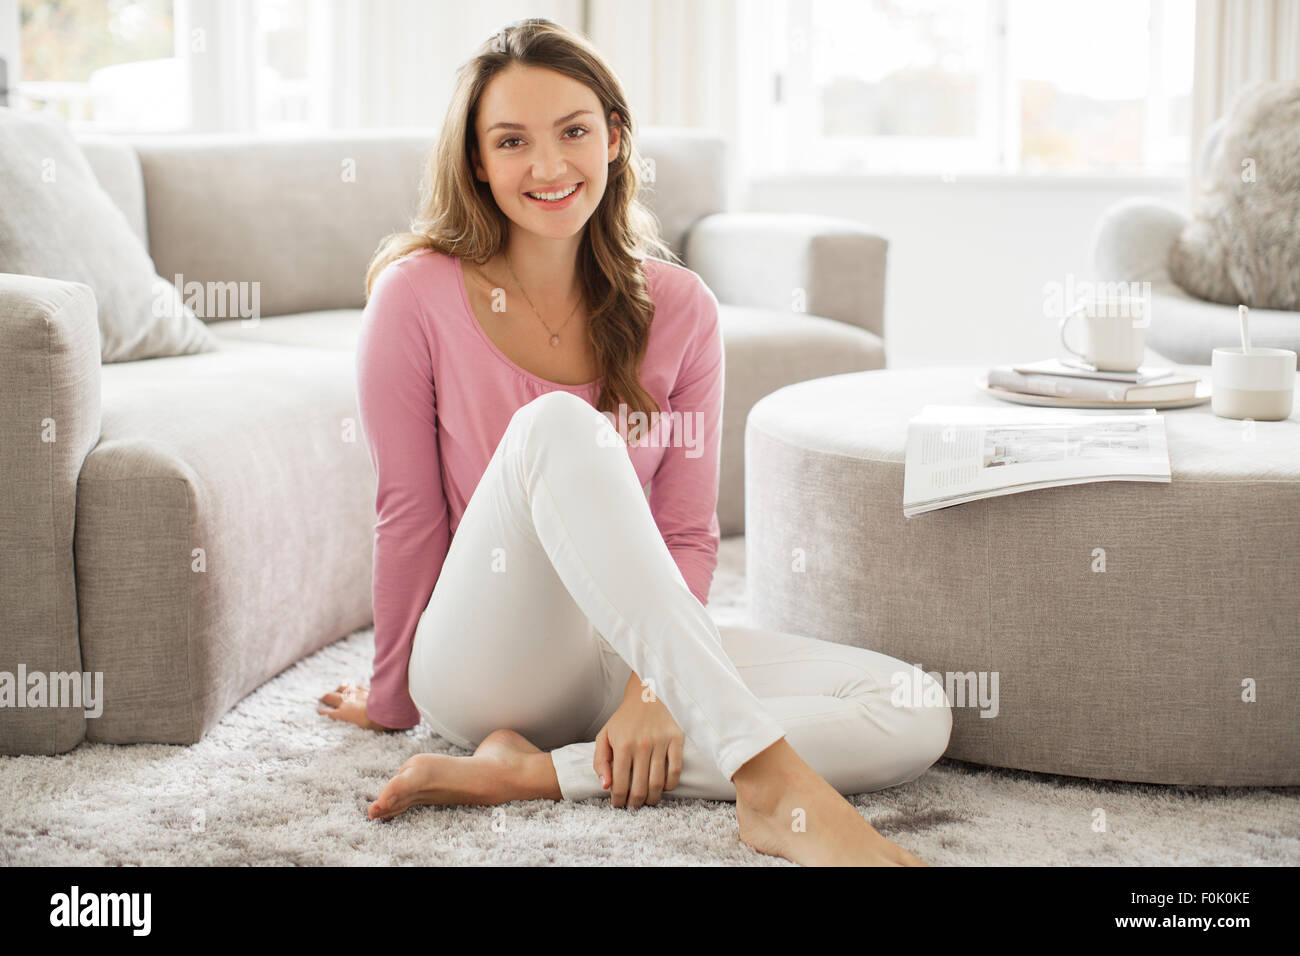 Portrait smiling barefoot woman in living room Stock Photo